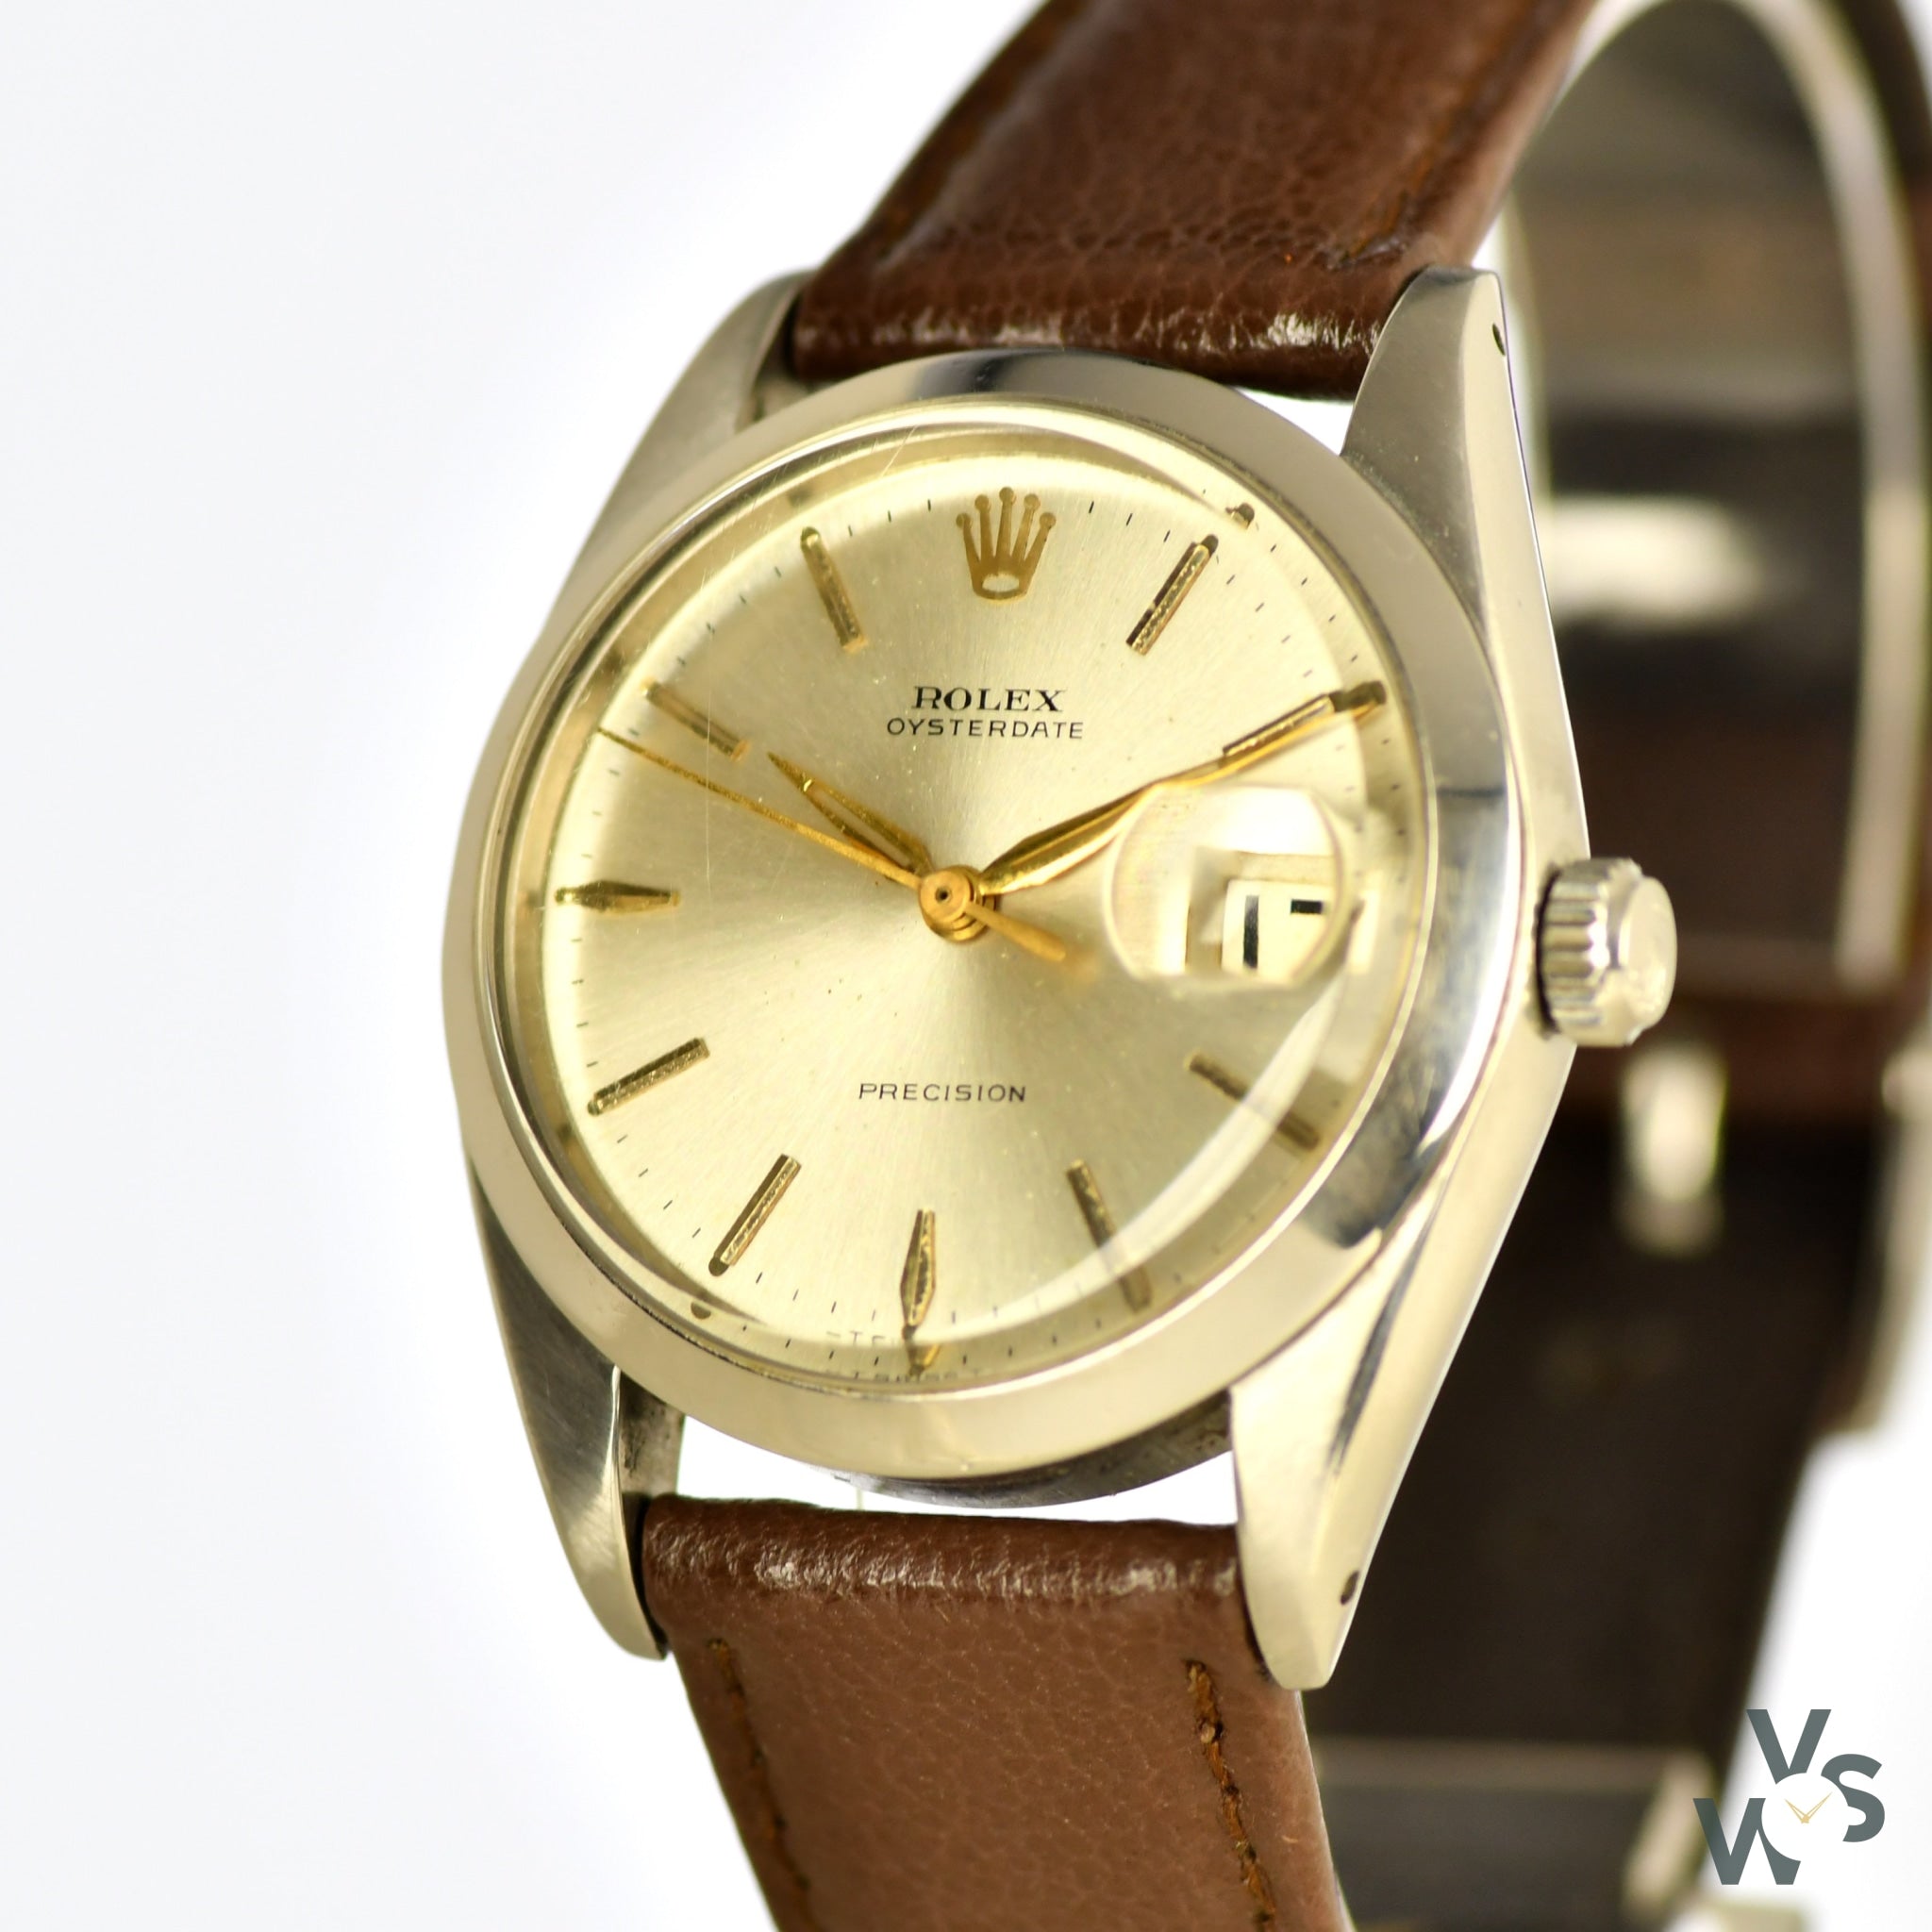 Vintage Rolex Oysterdate Precision 6694 - Manually-Wound - Cal. 1 – Vintage Watch Specialist